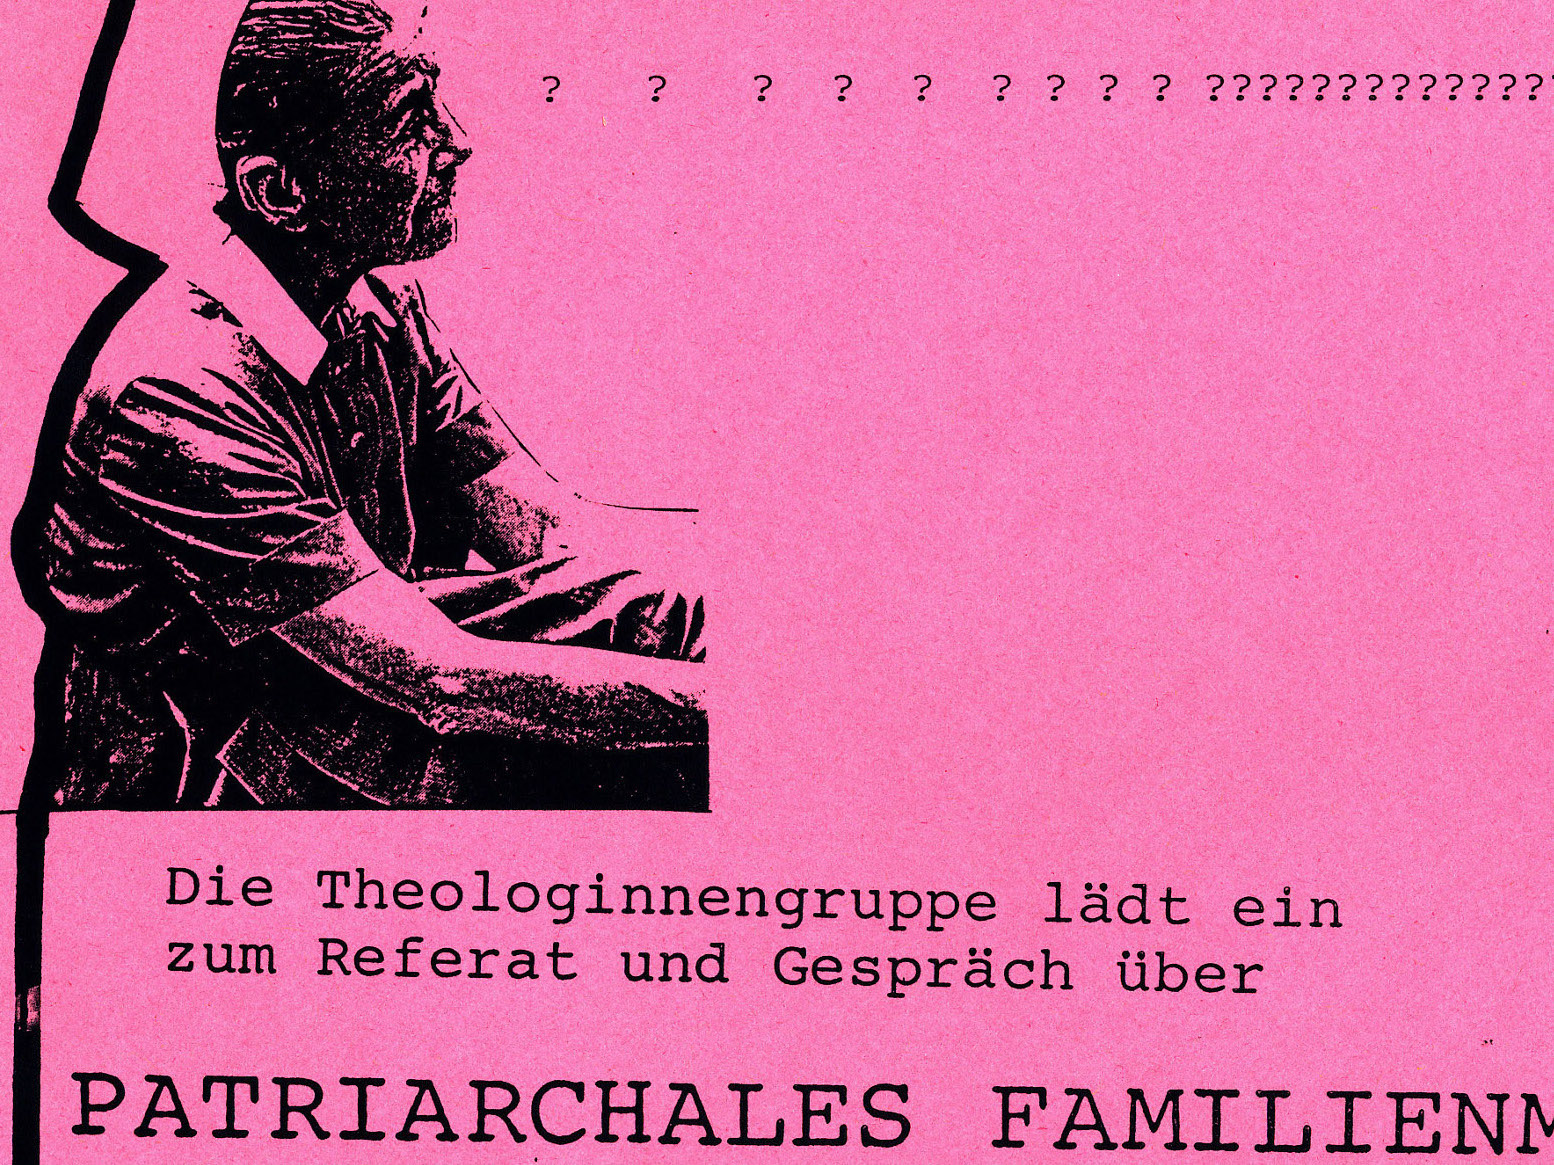 Flyer "Patriarchales Familienmodell"